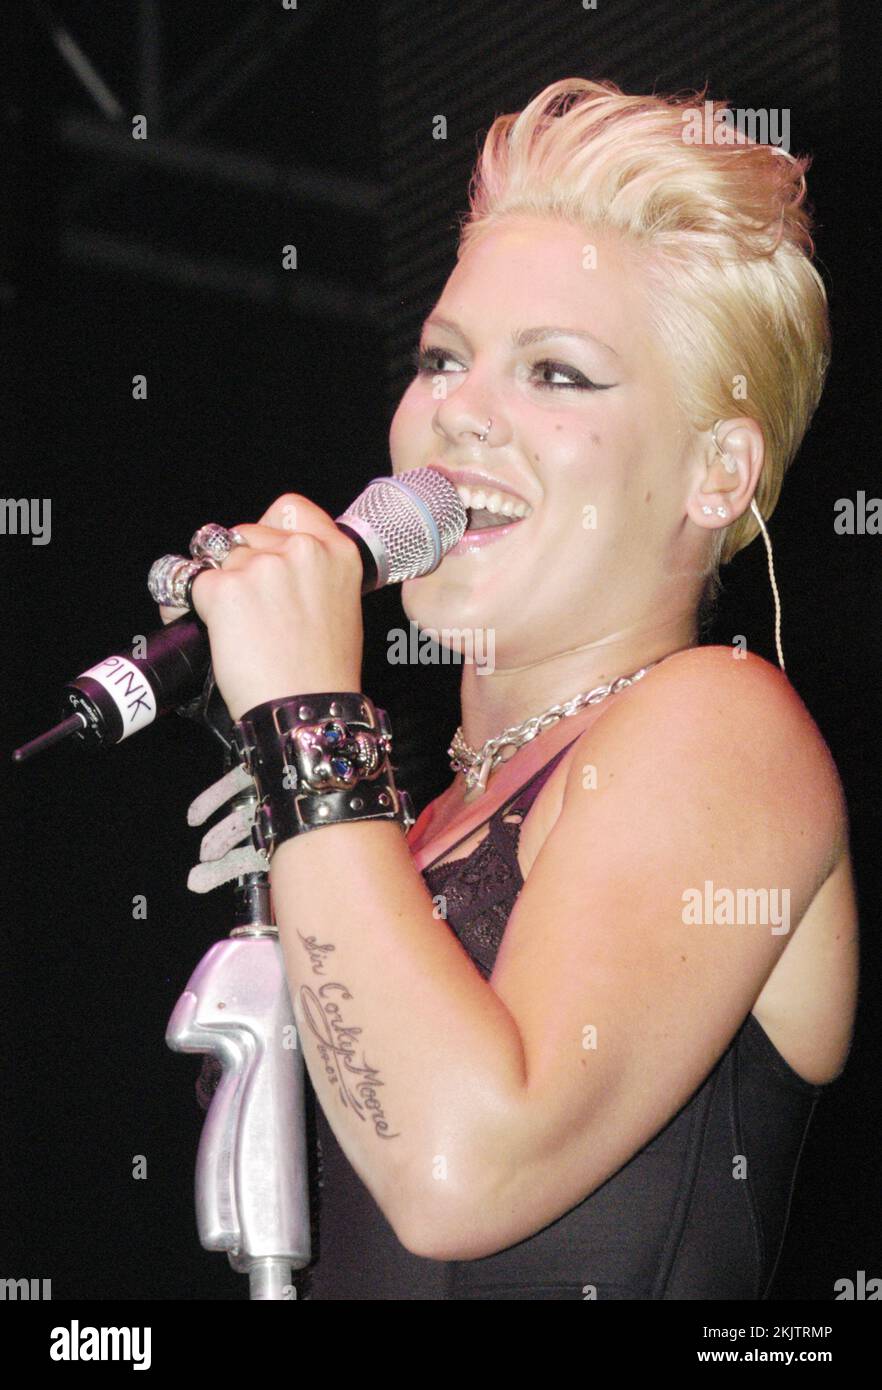 Pink (P!nk) playing live at the BBC Radio One Live exclusive tent arena event in Coopers Field in Cardiff, Wales, UK on September 14 2003. Photograph: ROB WATKINS Stock Photo